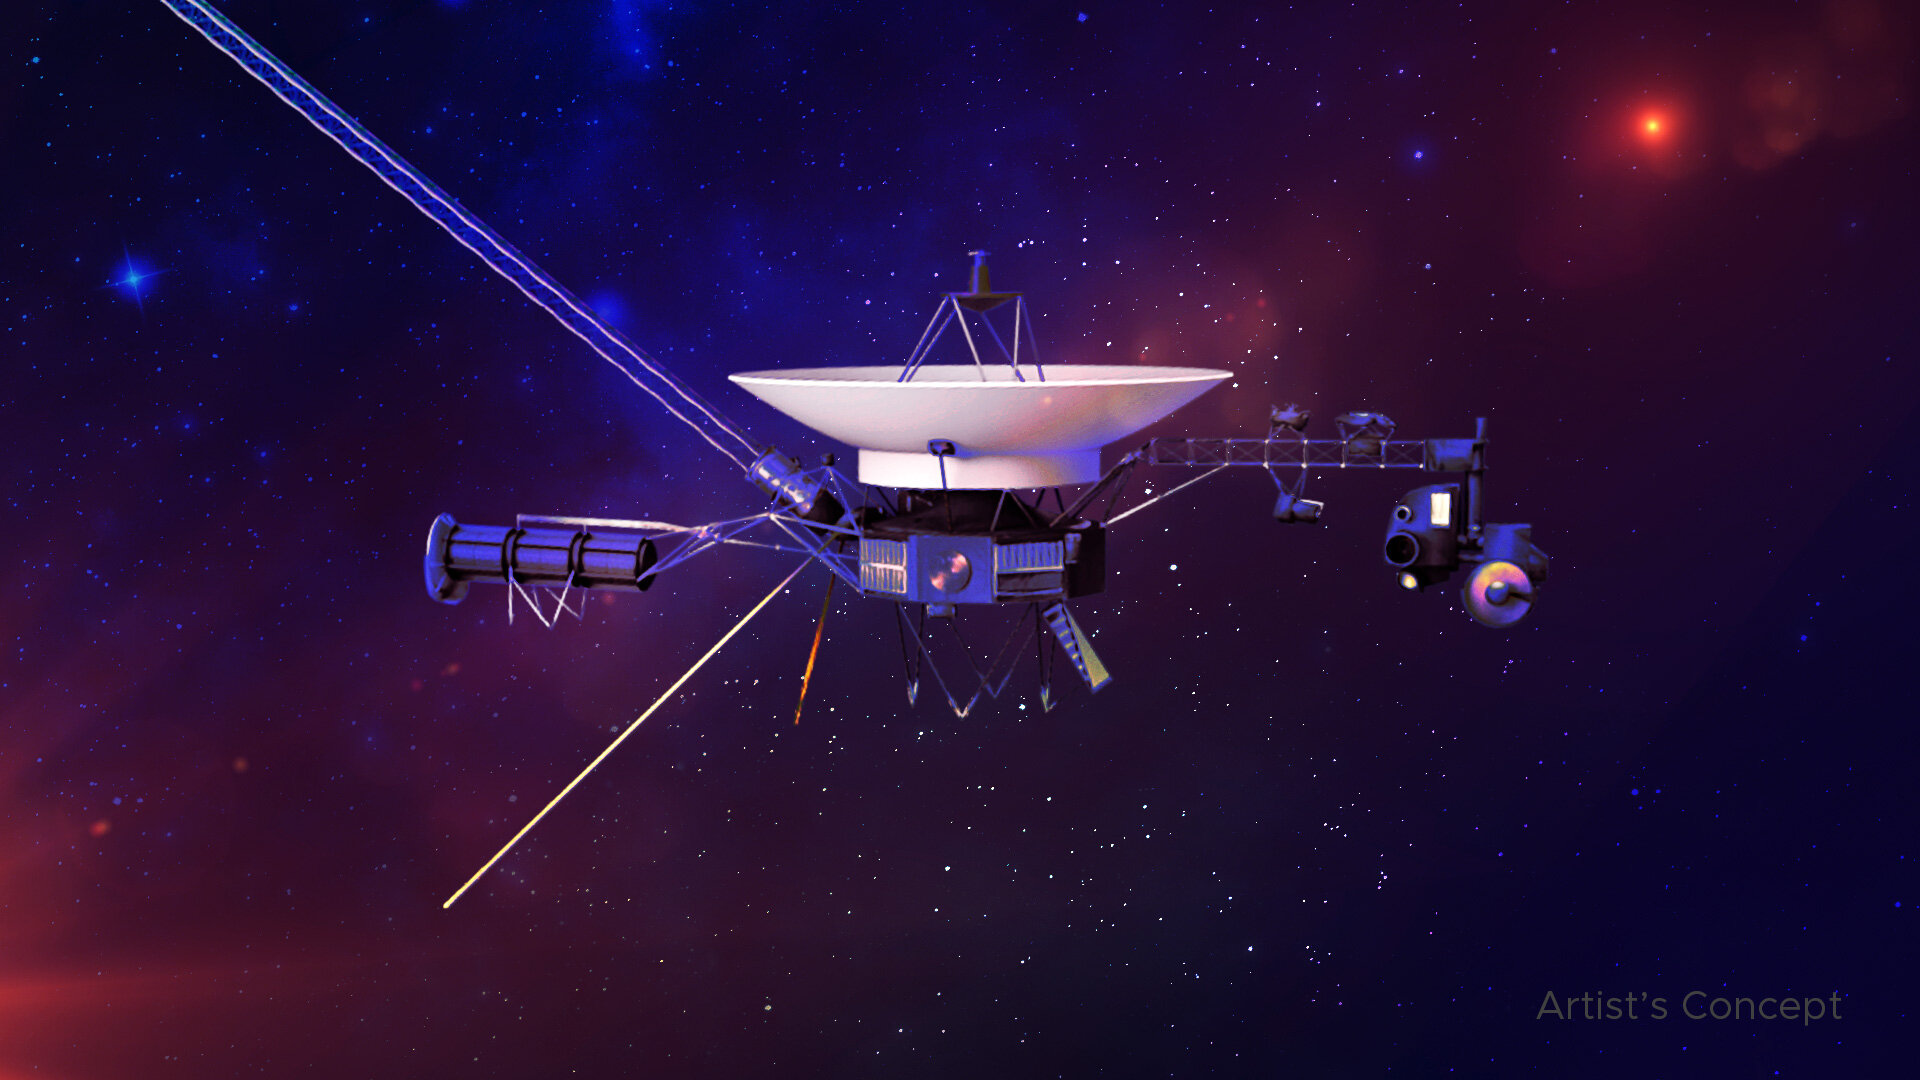 Voyager 1 sends back scientific data from all four instruments